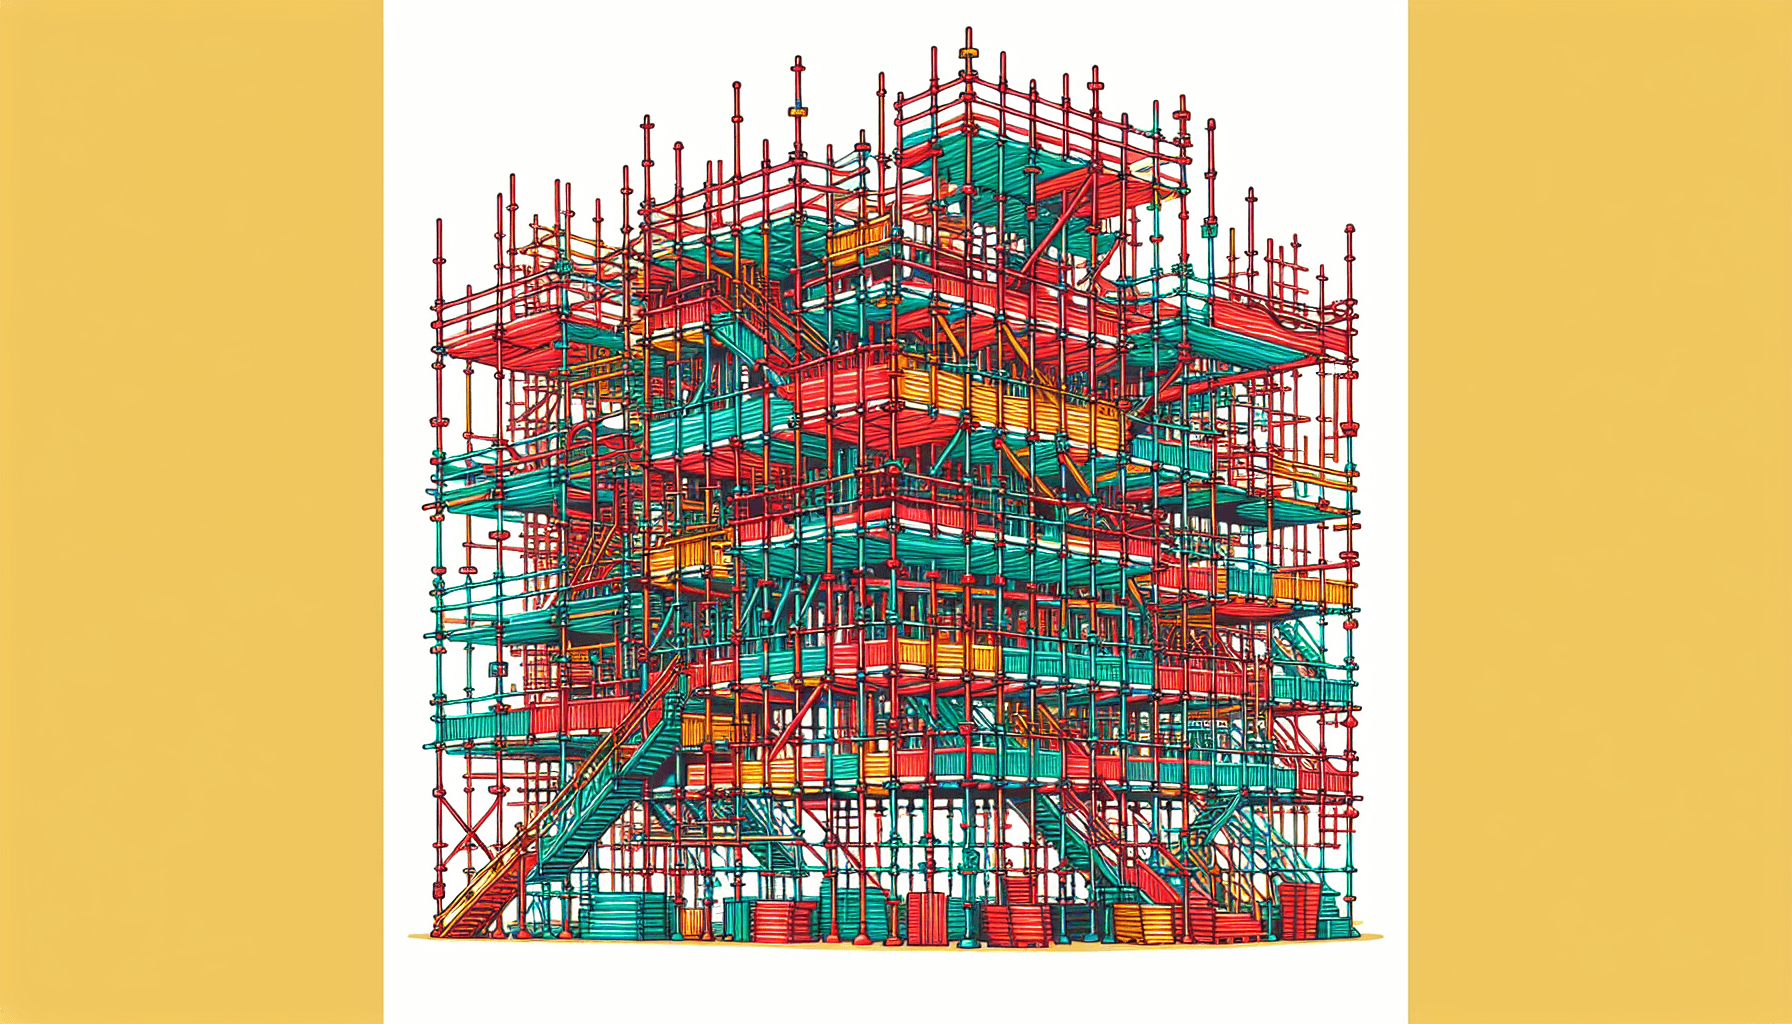 Scaffolding in flat illustration style and white background, red #f47574, green #88c7a8, yellow #fcc44b, and blue #645bc8 colors.